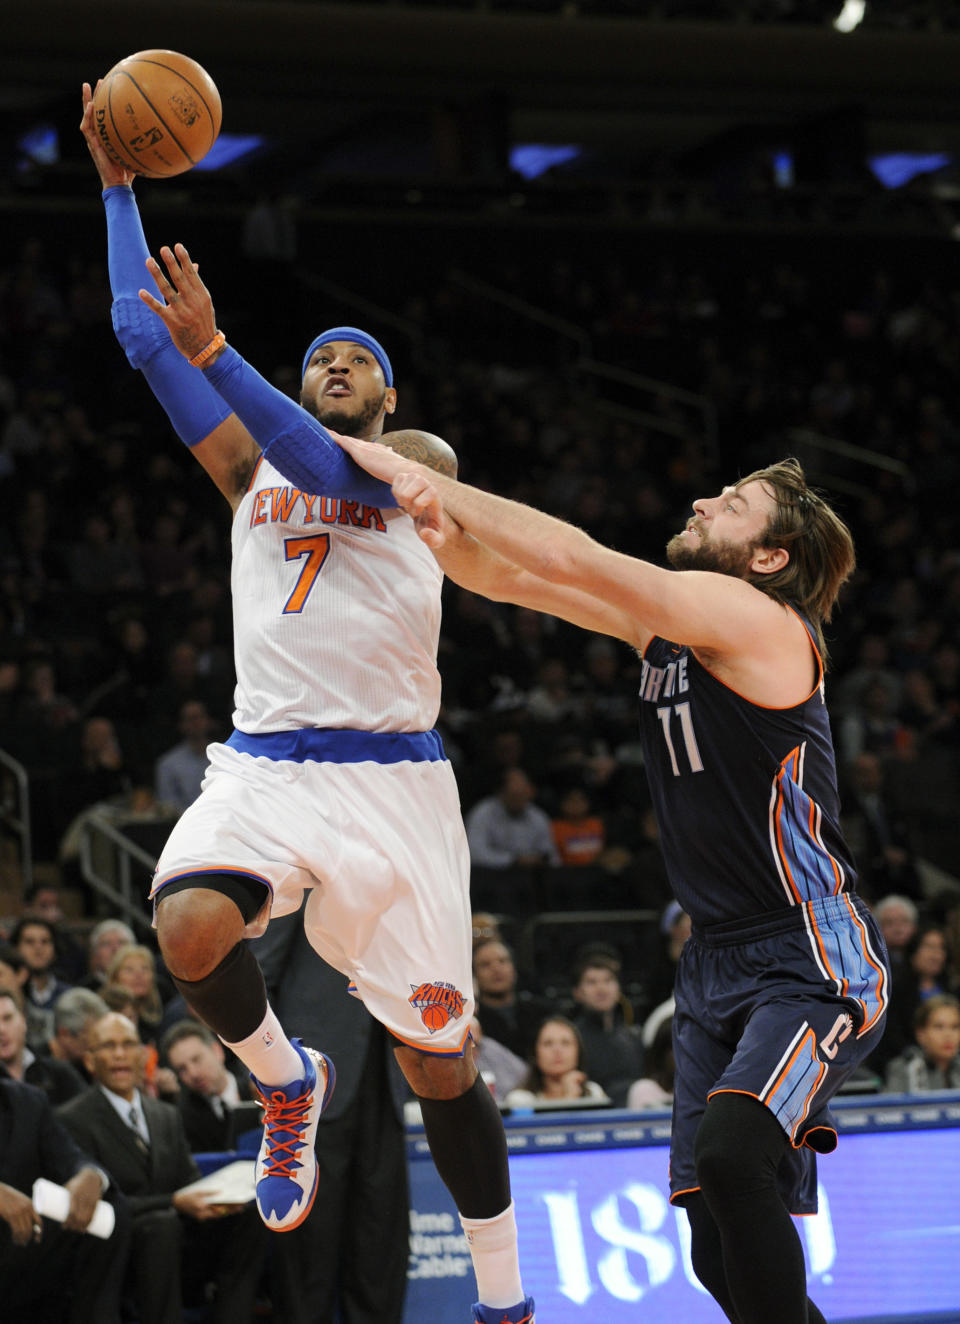 New York Knicks' Carmelo Anthony, left, puts up a shot as he gets by Charlotte Bobcats' Josh McRoberts during the first quarter of an NBA basketball game, Friday, Jan. 24, 2014, at Madison Square Garden in New York. (AP Photo/Bill Kostroun)